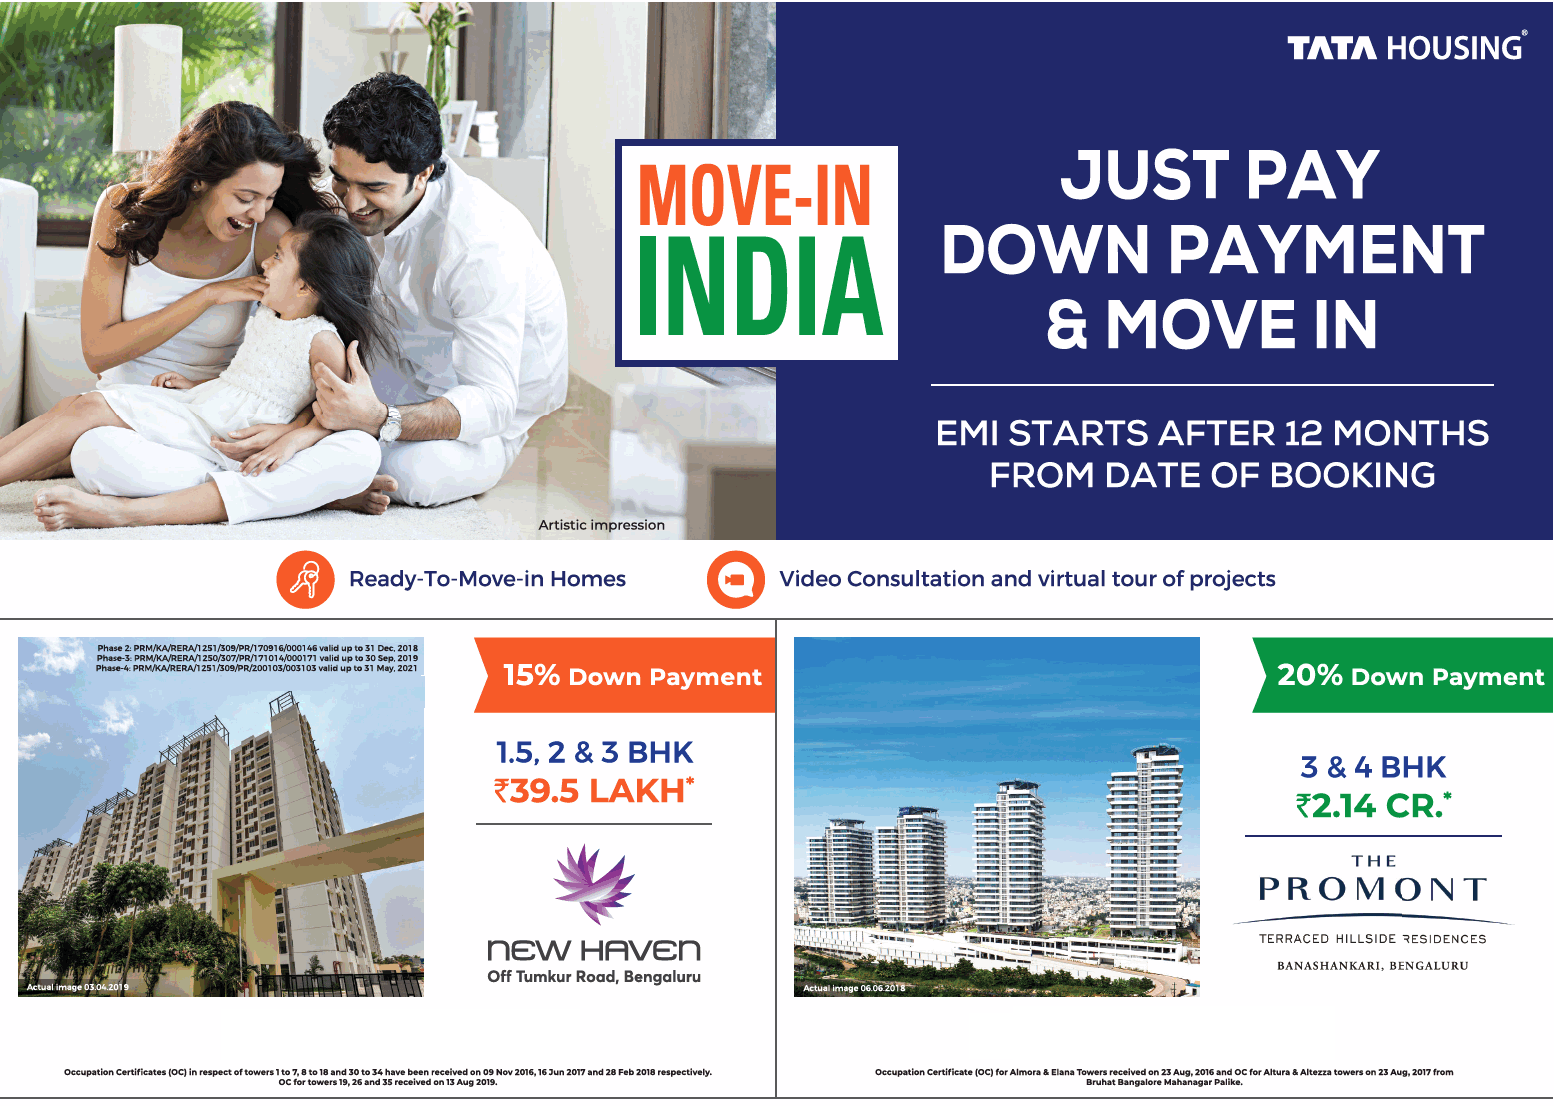 Just pay down payment and move in at Tata New Haven and Tata The Promont in Bangalore Update